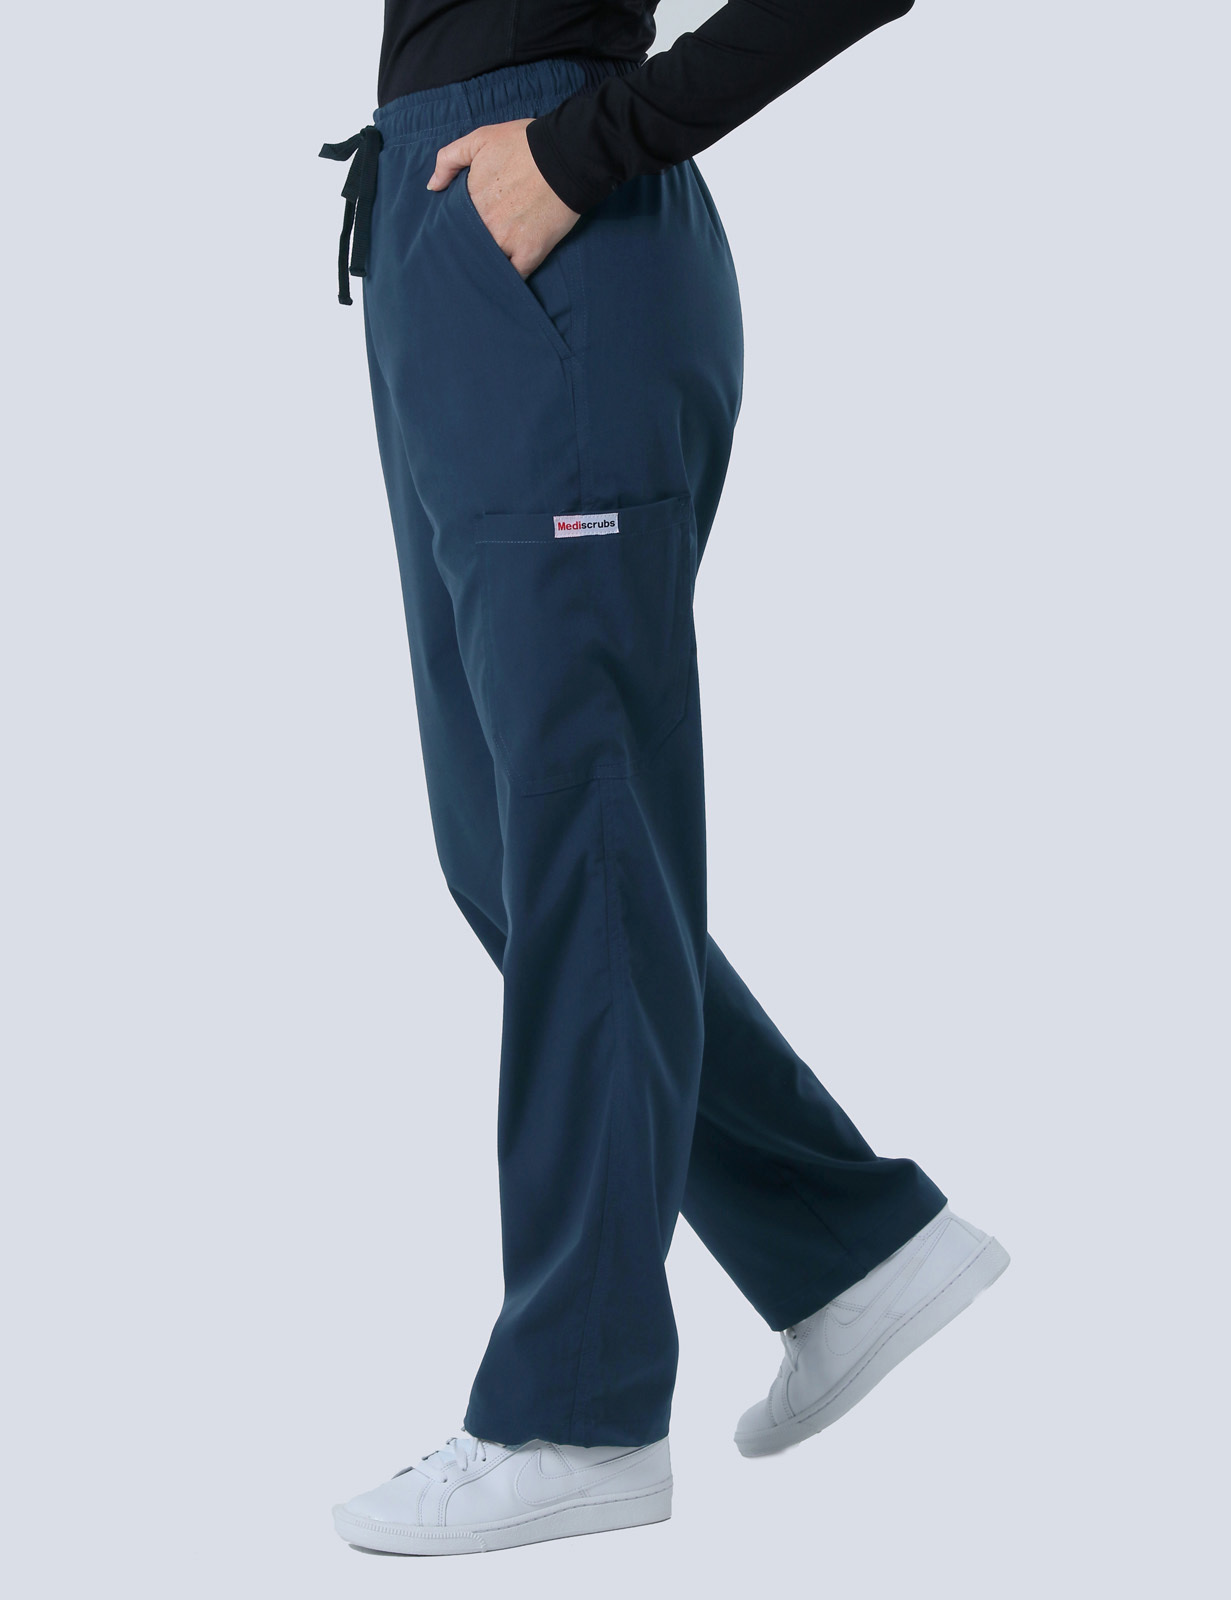 Maleny Hospital - Registered Nurse (4 Pocket Scrub Top and Cargo Pants in Navy incl Logos)